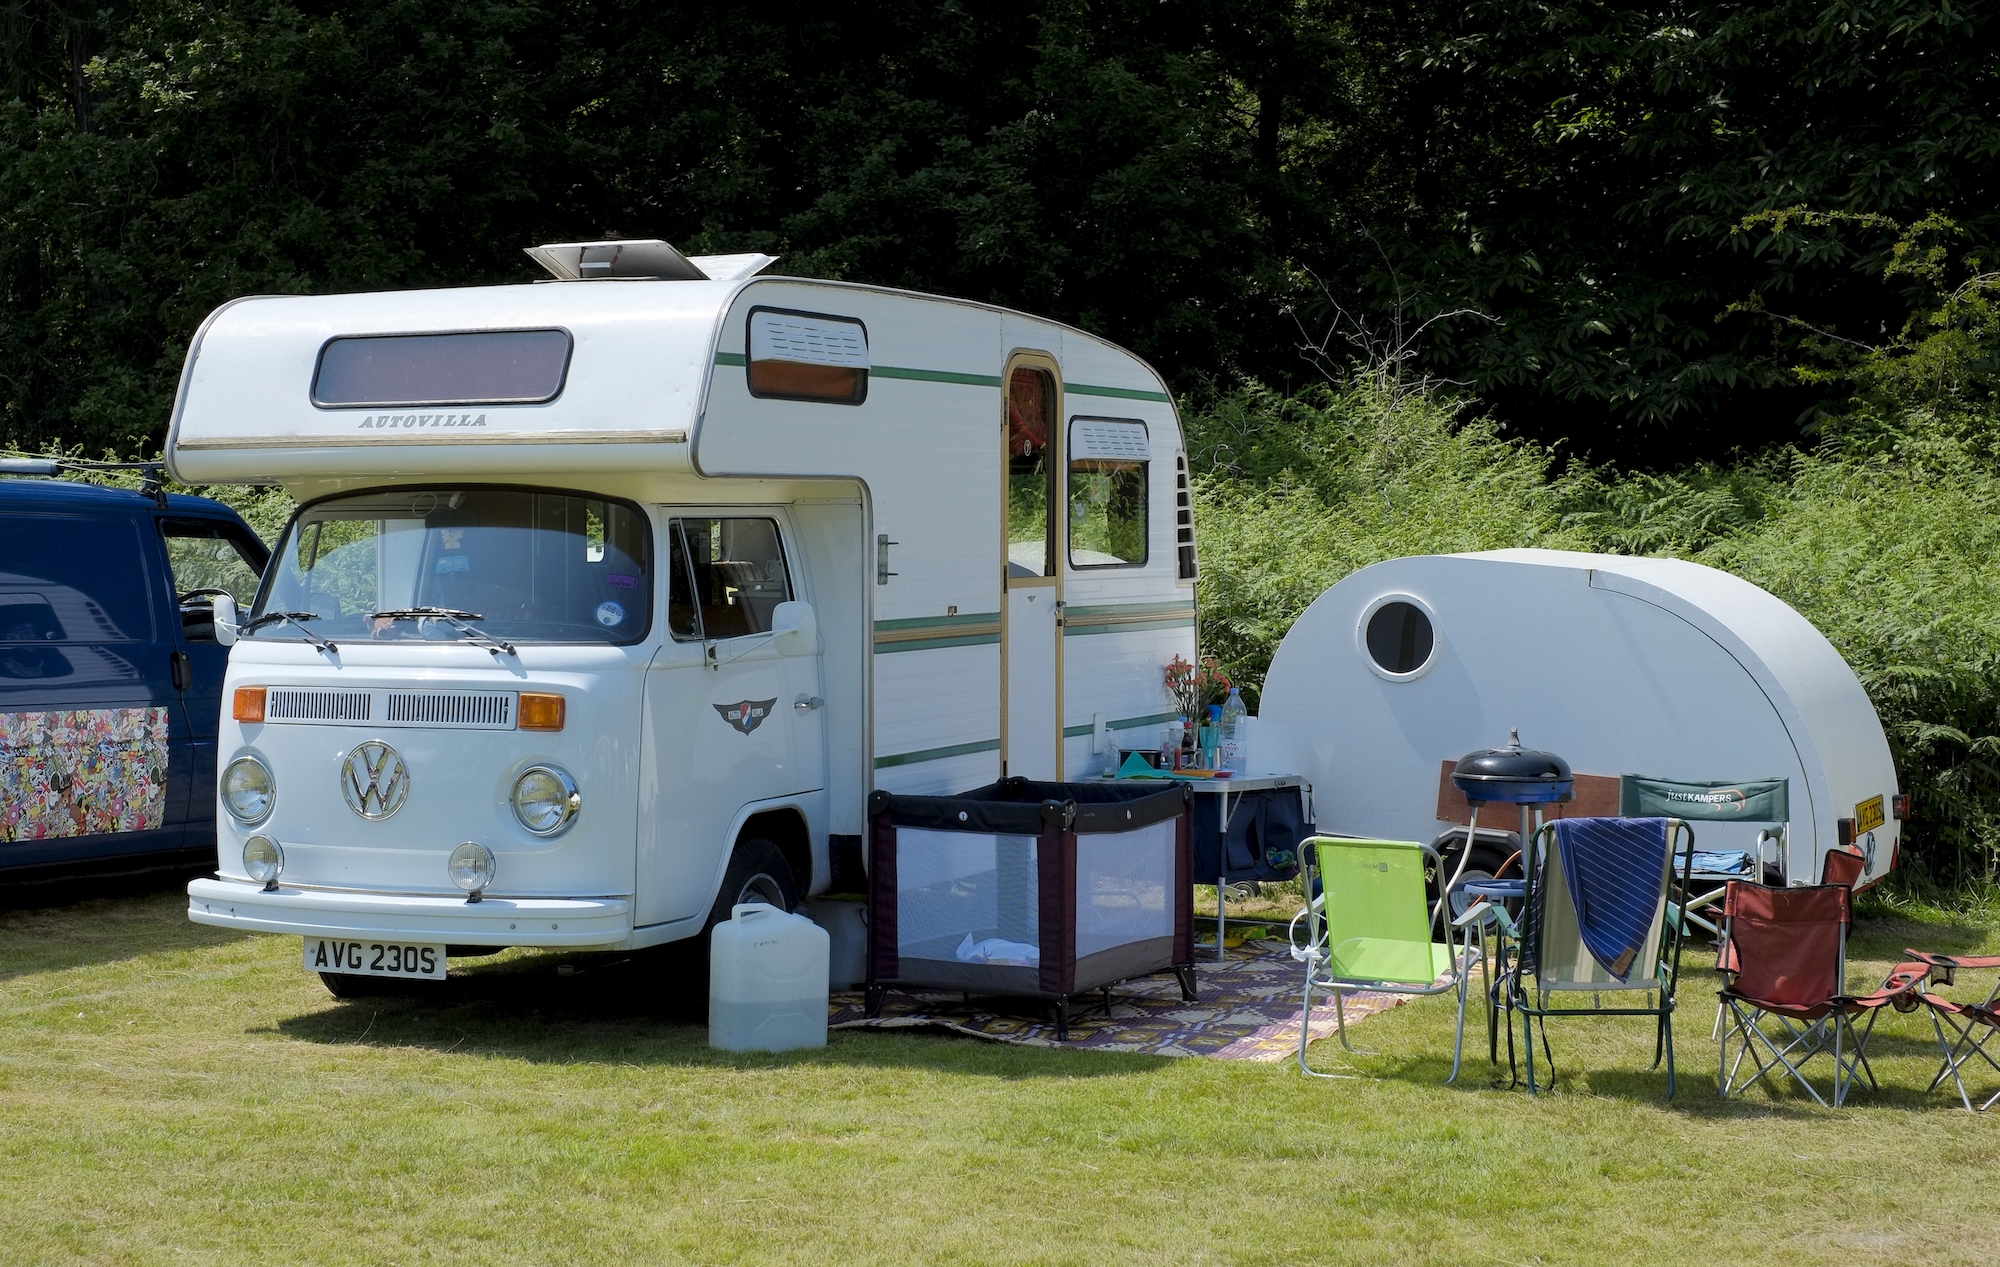 A Volkswagen RV on display at the Dubs at the Hall VW festival in Norfolk, United Kingdom